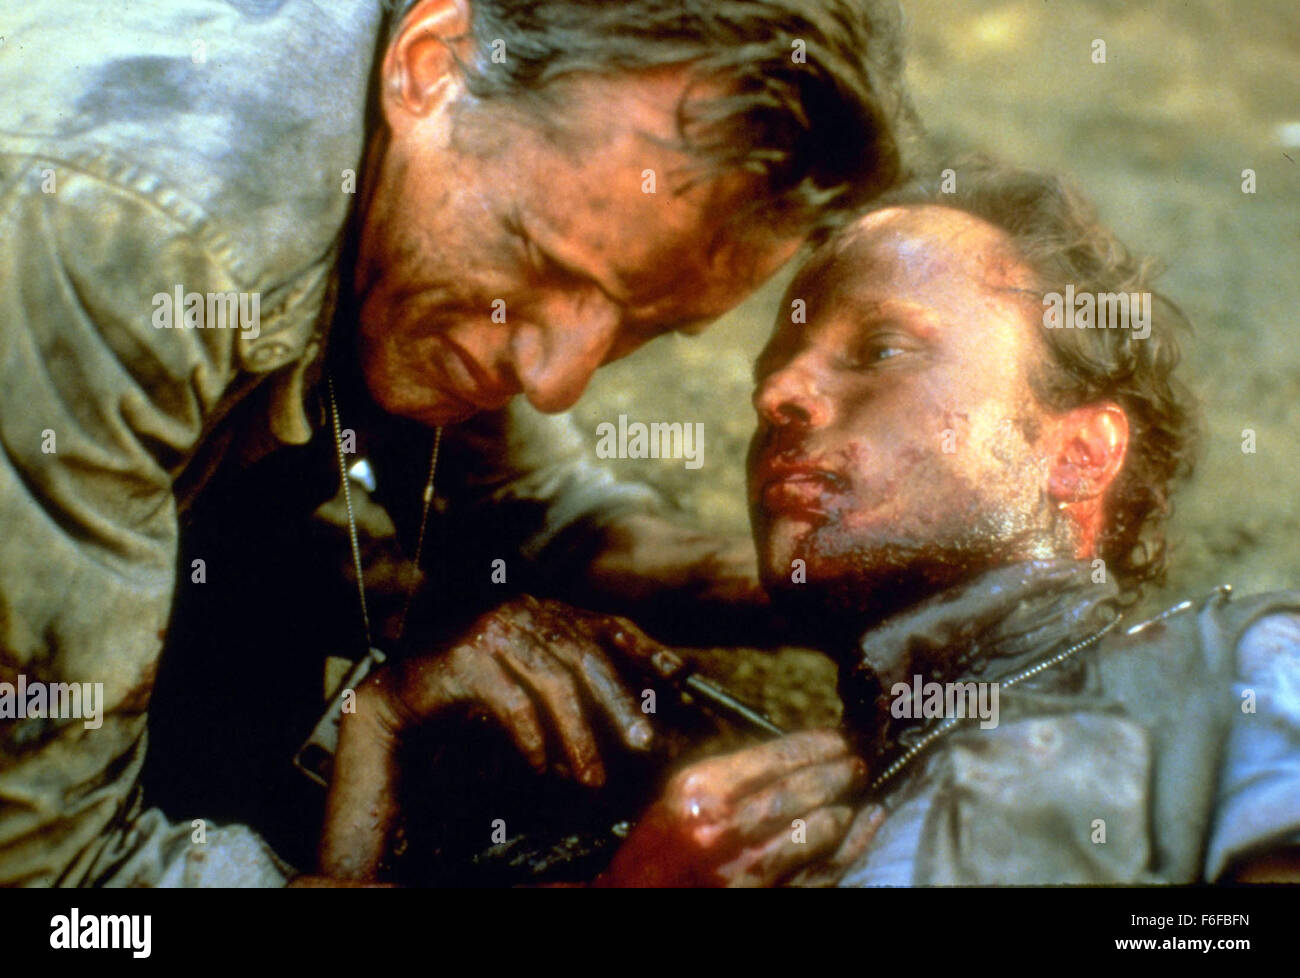 Feb 28, 1986; Mexico City, MEXICO; JAMES WOODS (left) as Richard Boyle and JOHN SAVAGE as John Cassidy in the thrilling, war, drama film 'Salvador' directed by Oliver Stone. Stock Photo